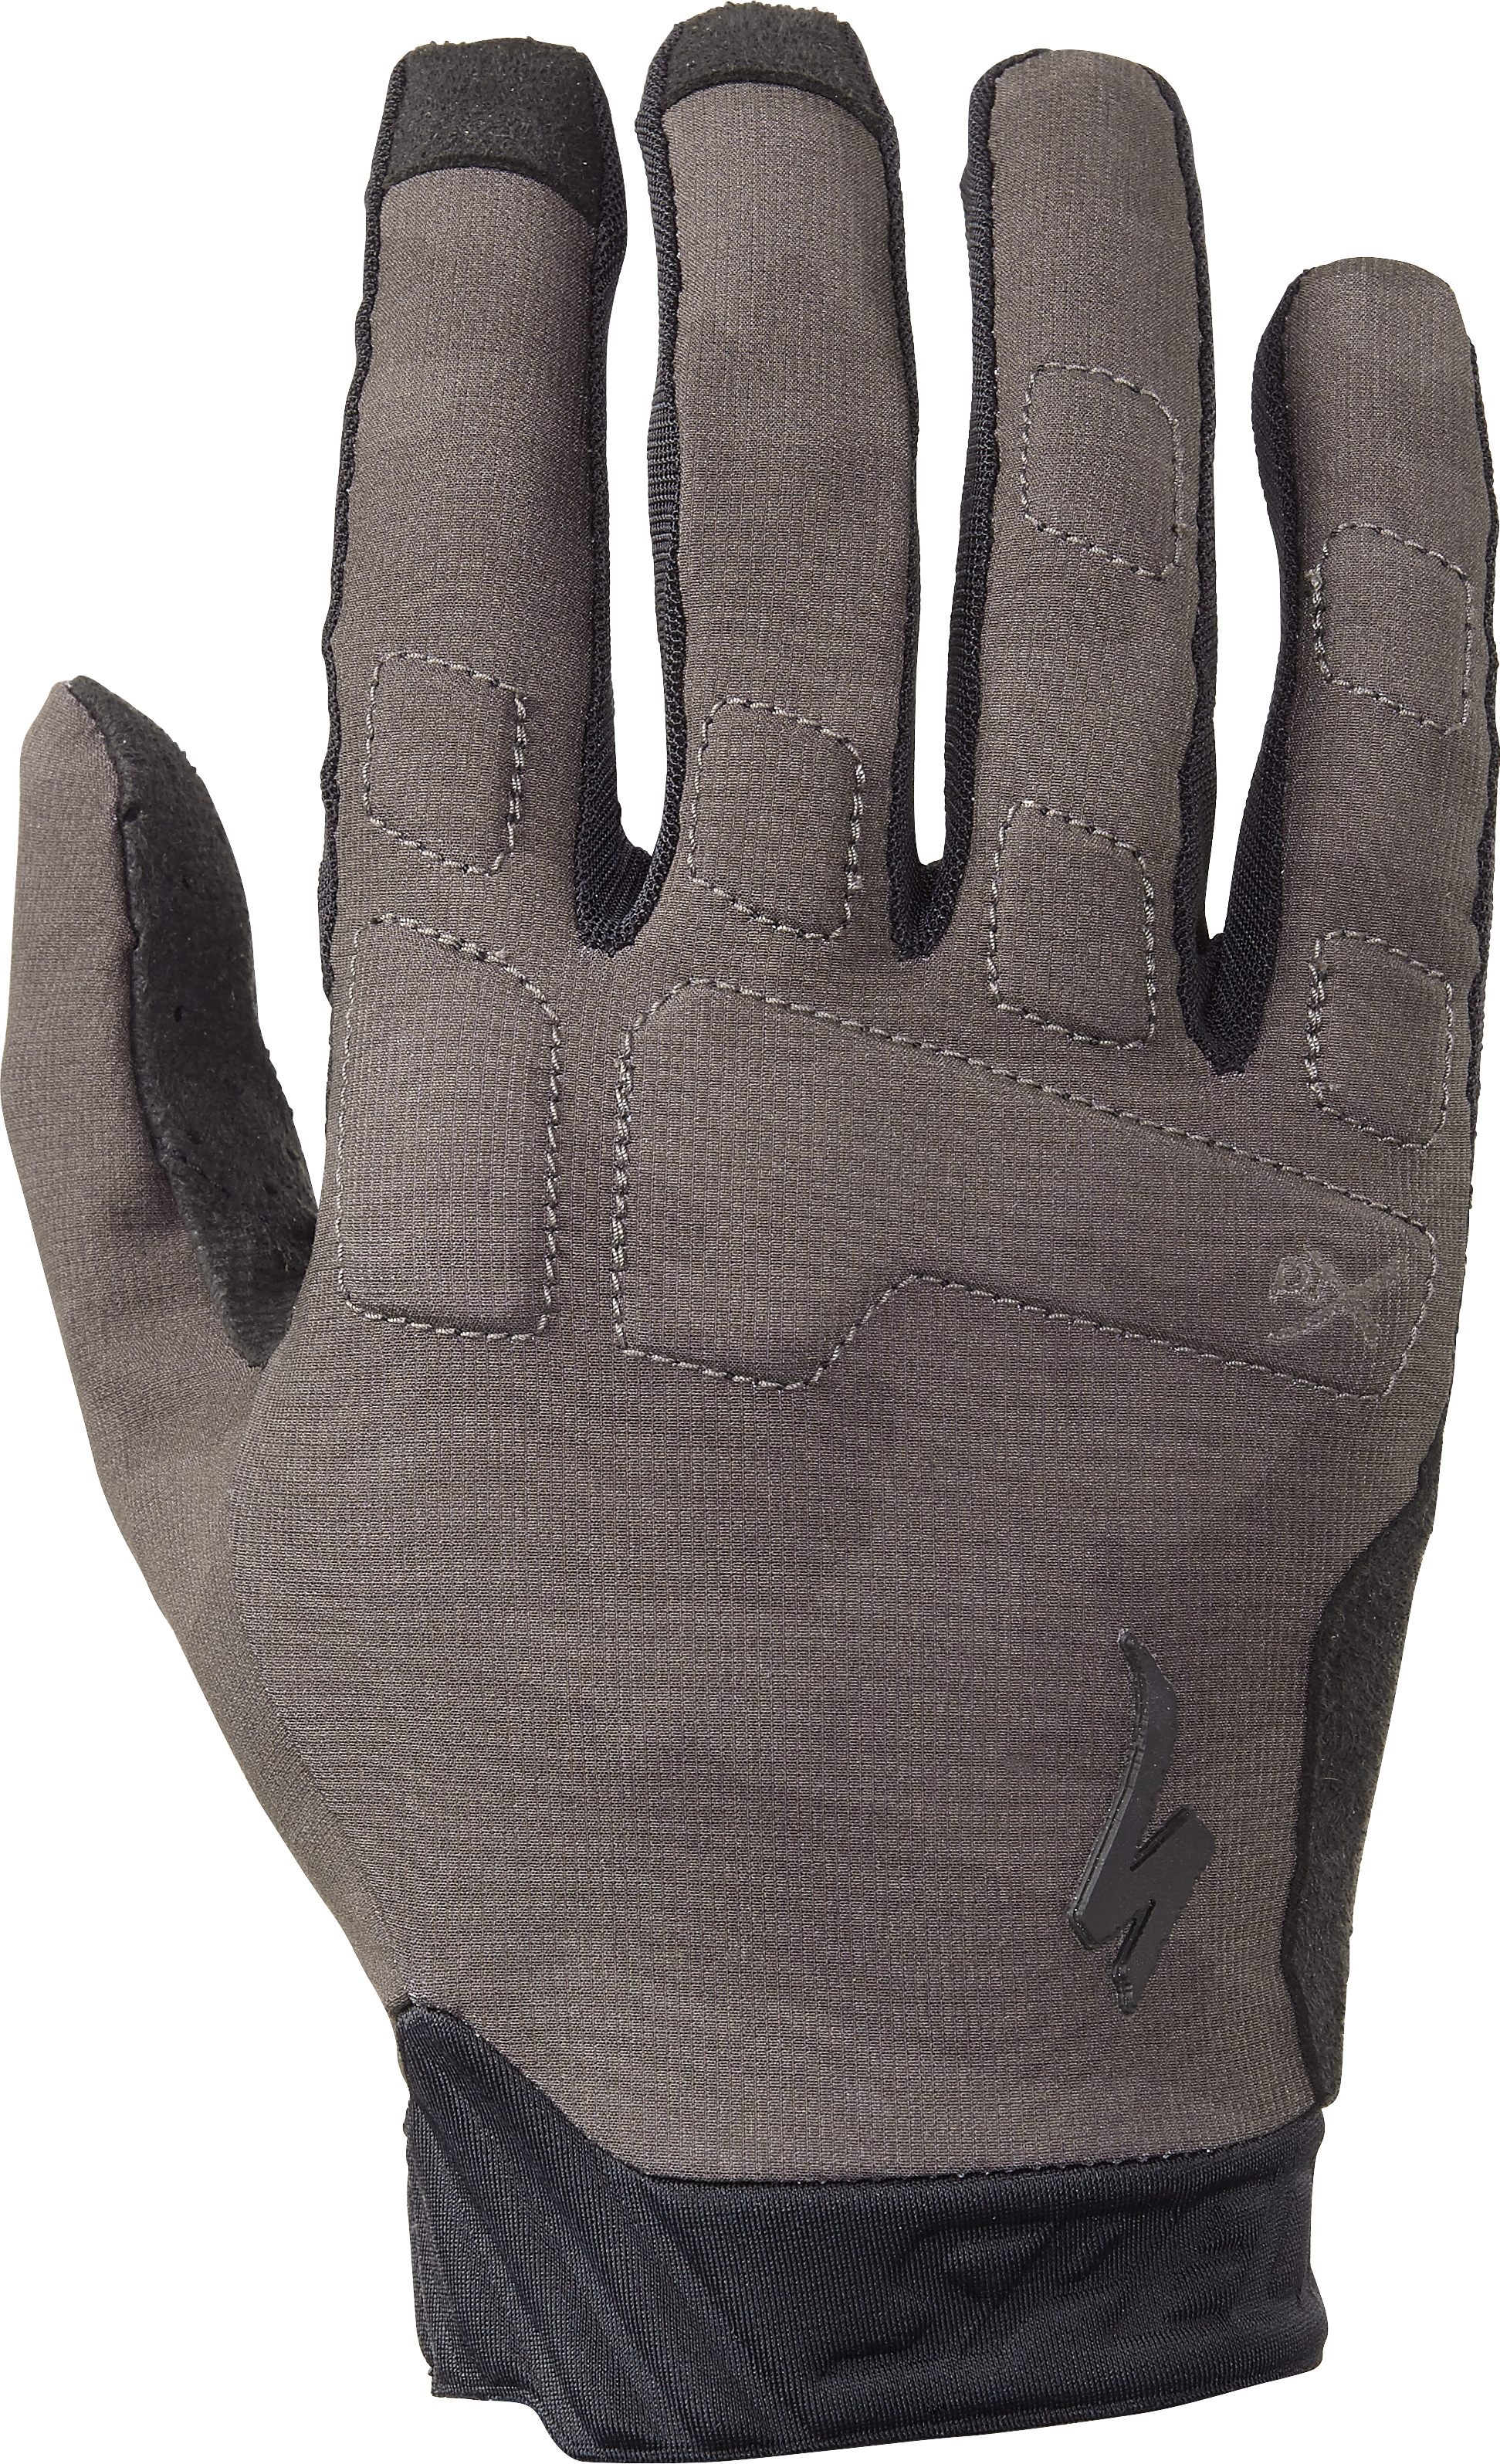 Specialized  Ridge Long Finger Cycling Gloves in Black Camo S Black Camo